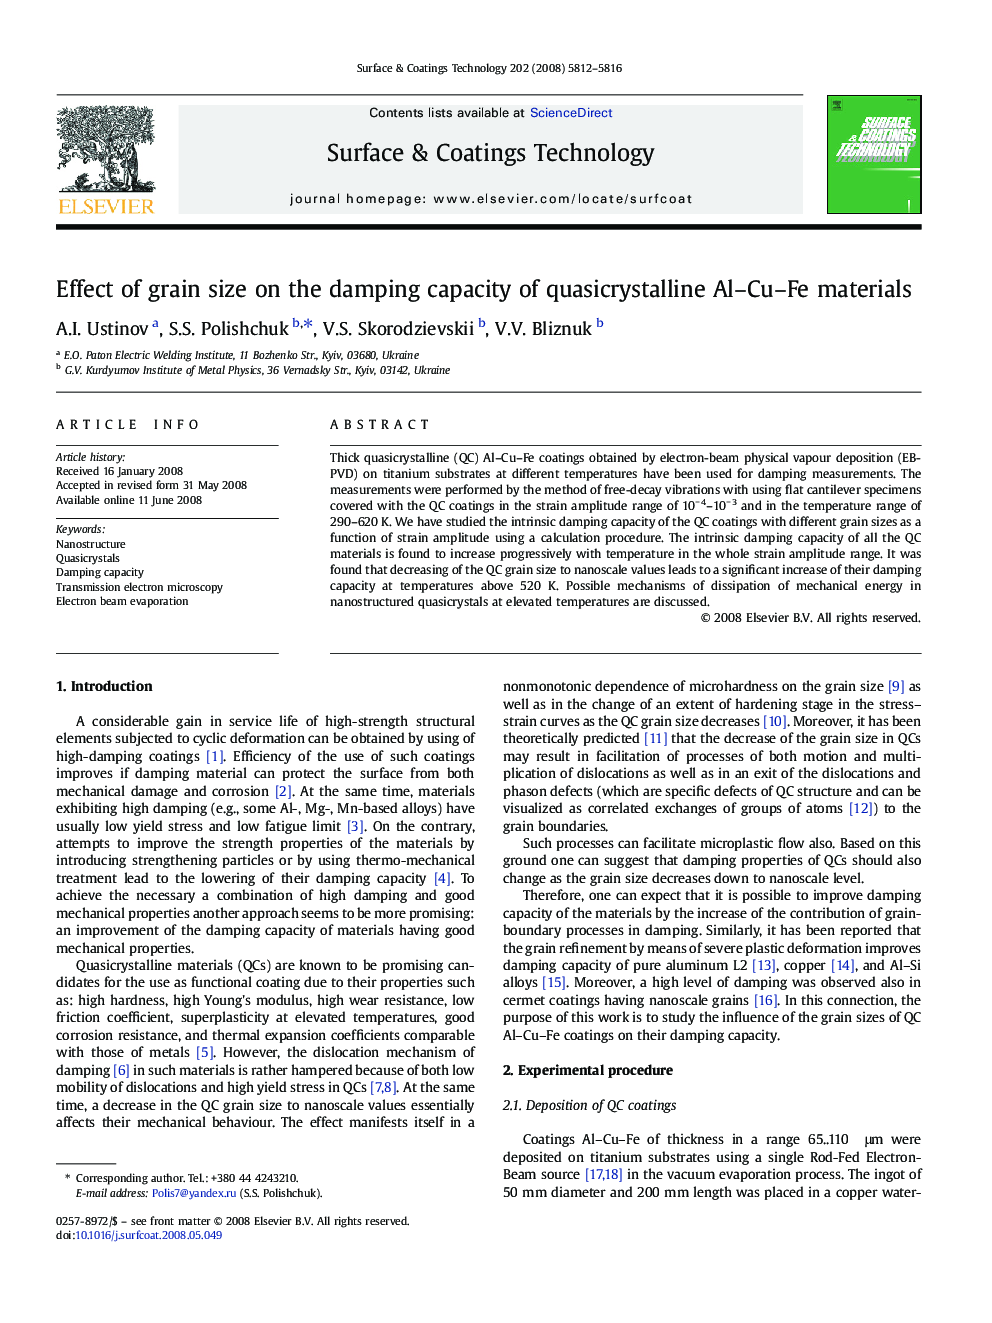 Effect of grain size on the damping capacity of quasicrystalline Al–Cu–Fe materials